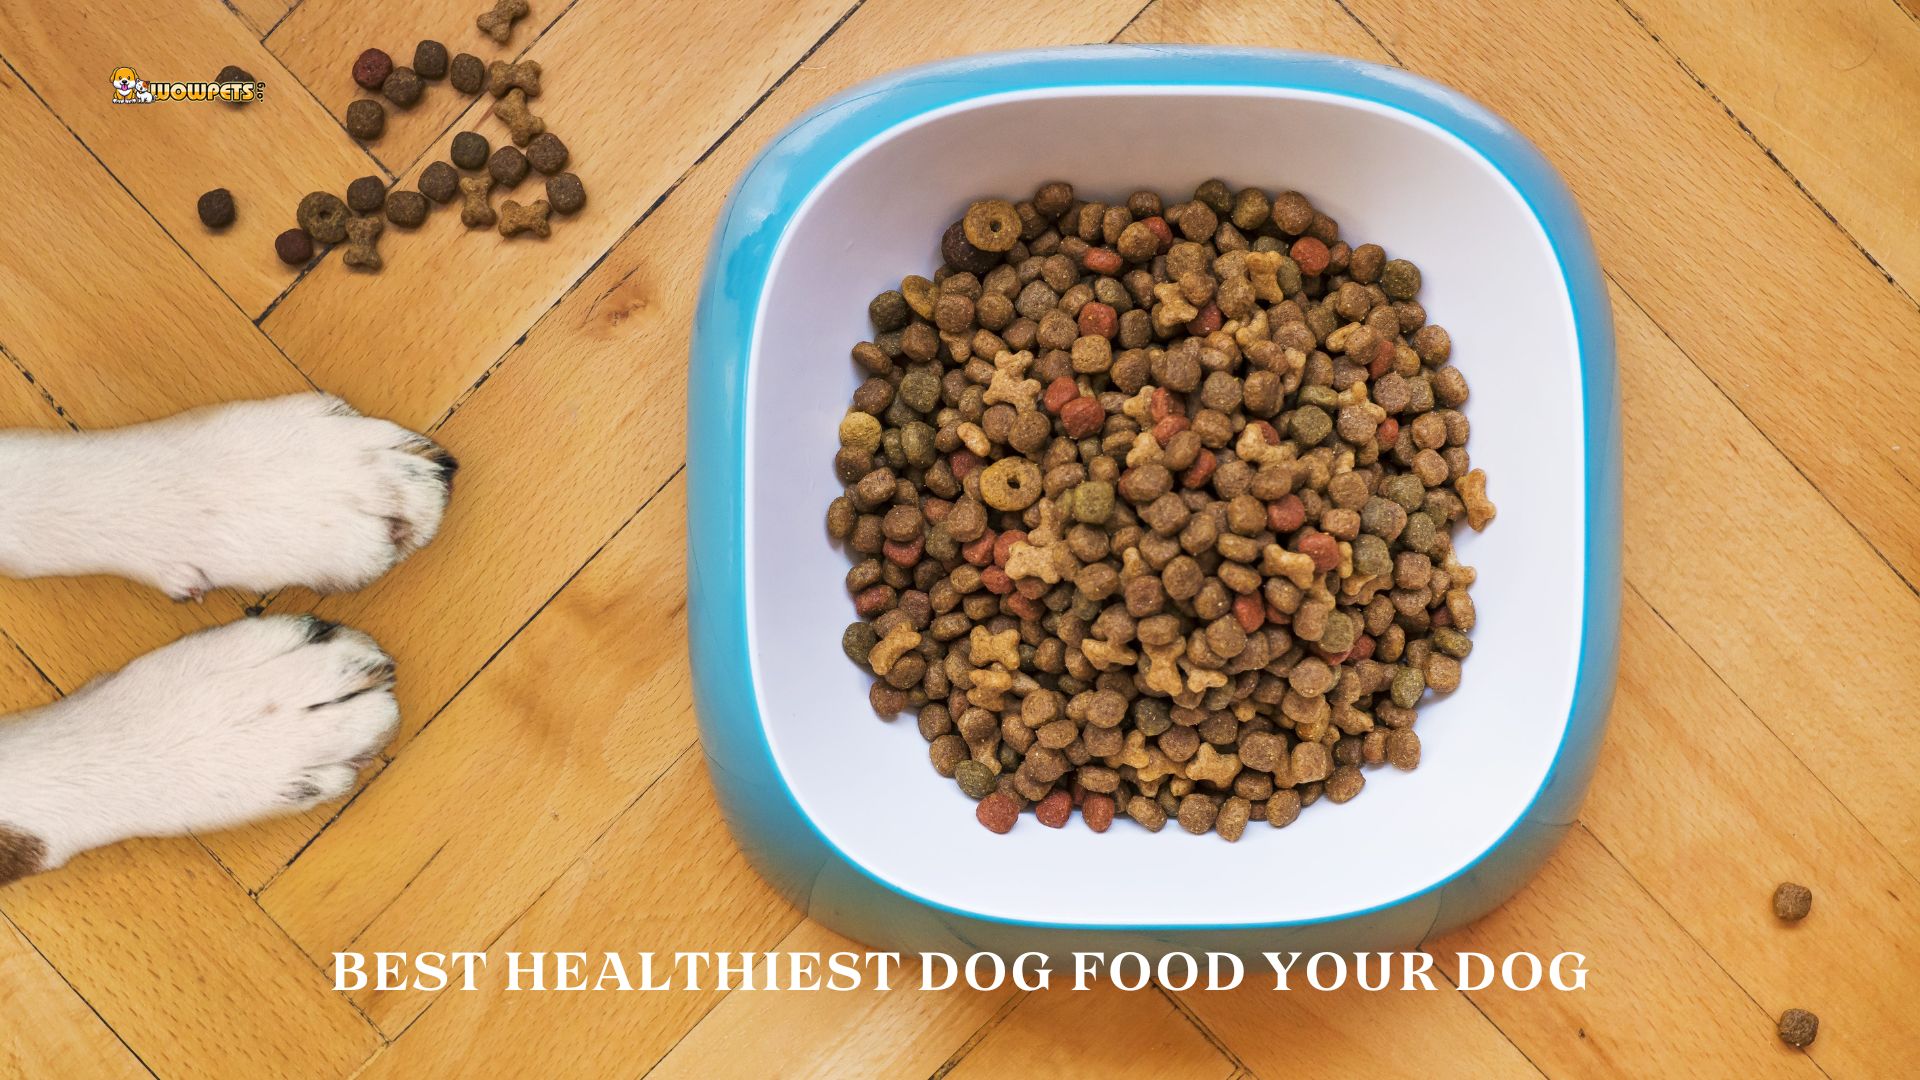 Best healthiest dog food your dog will love